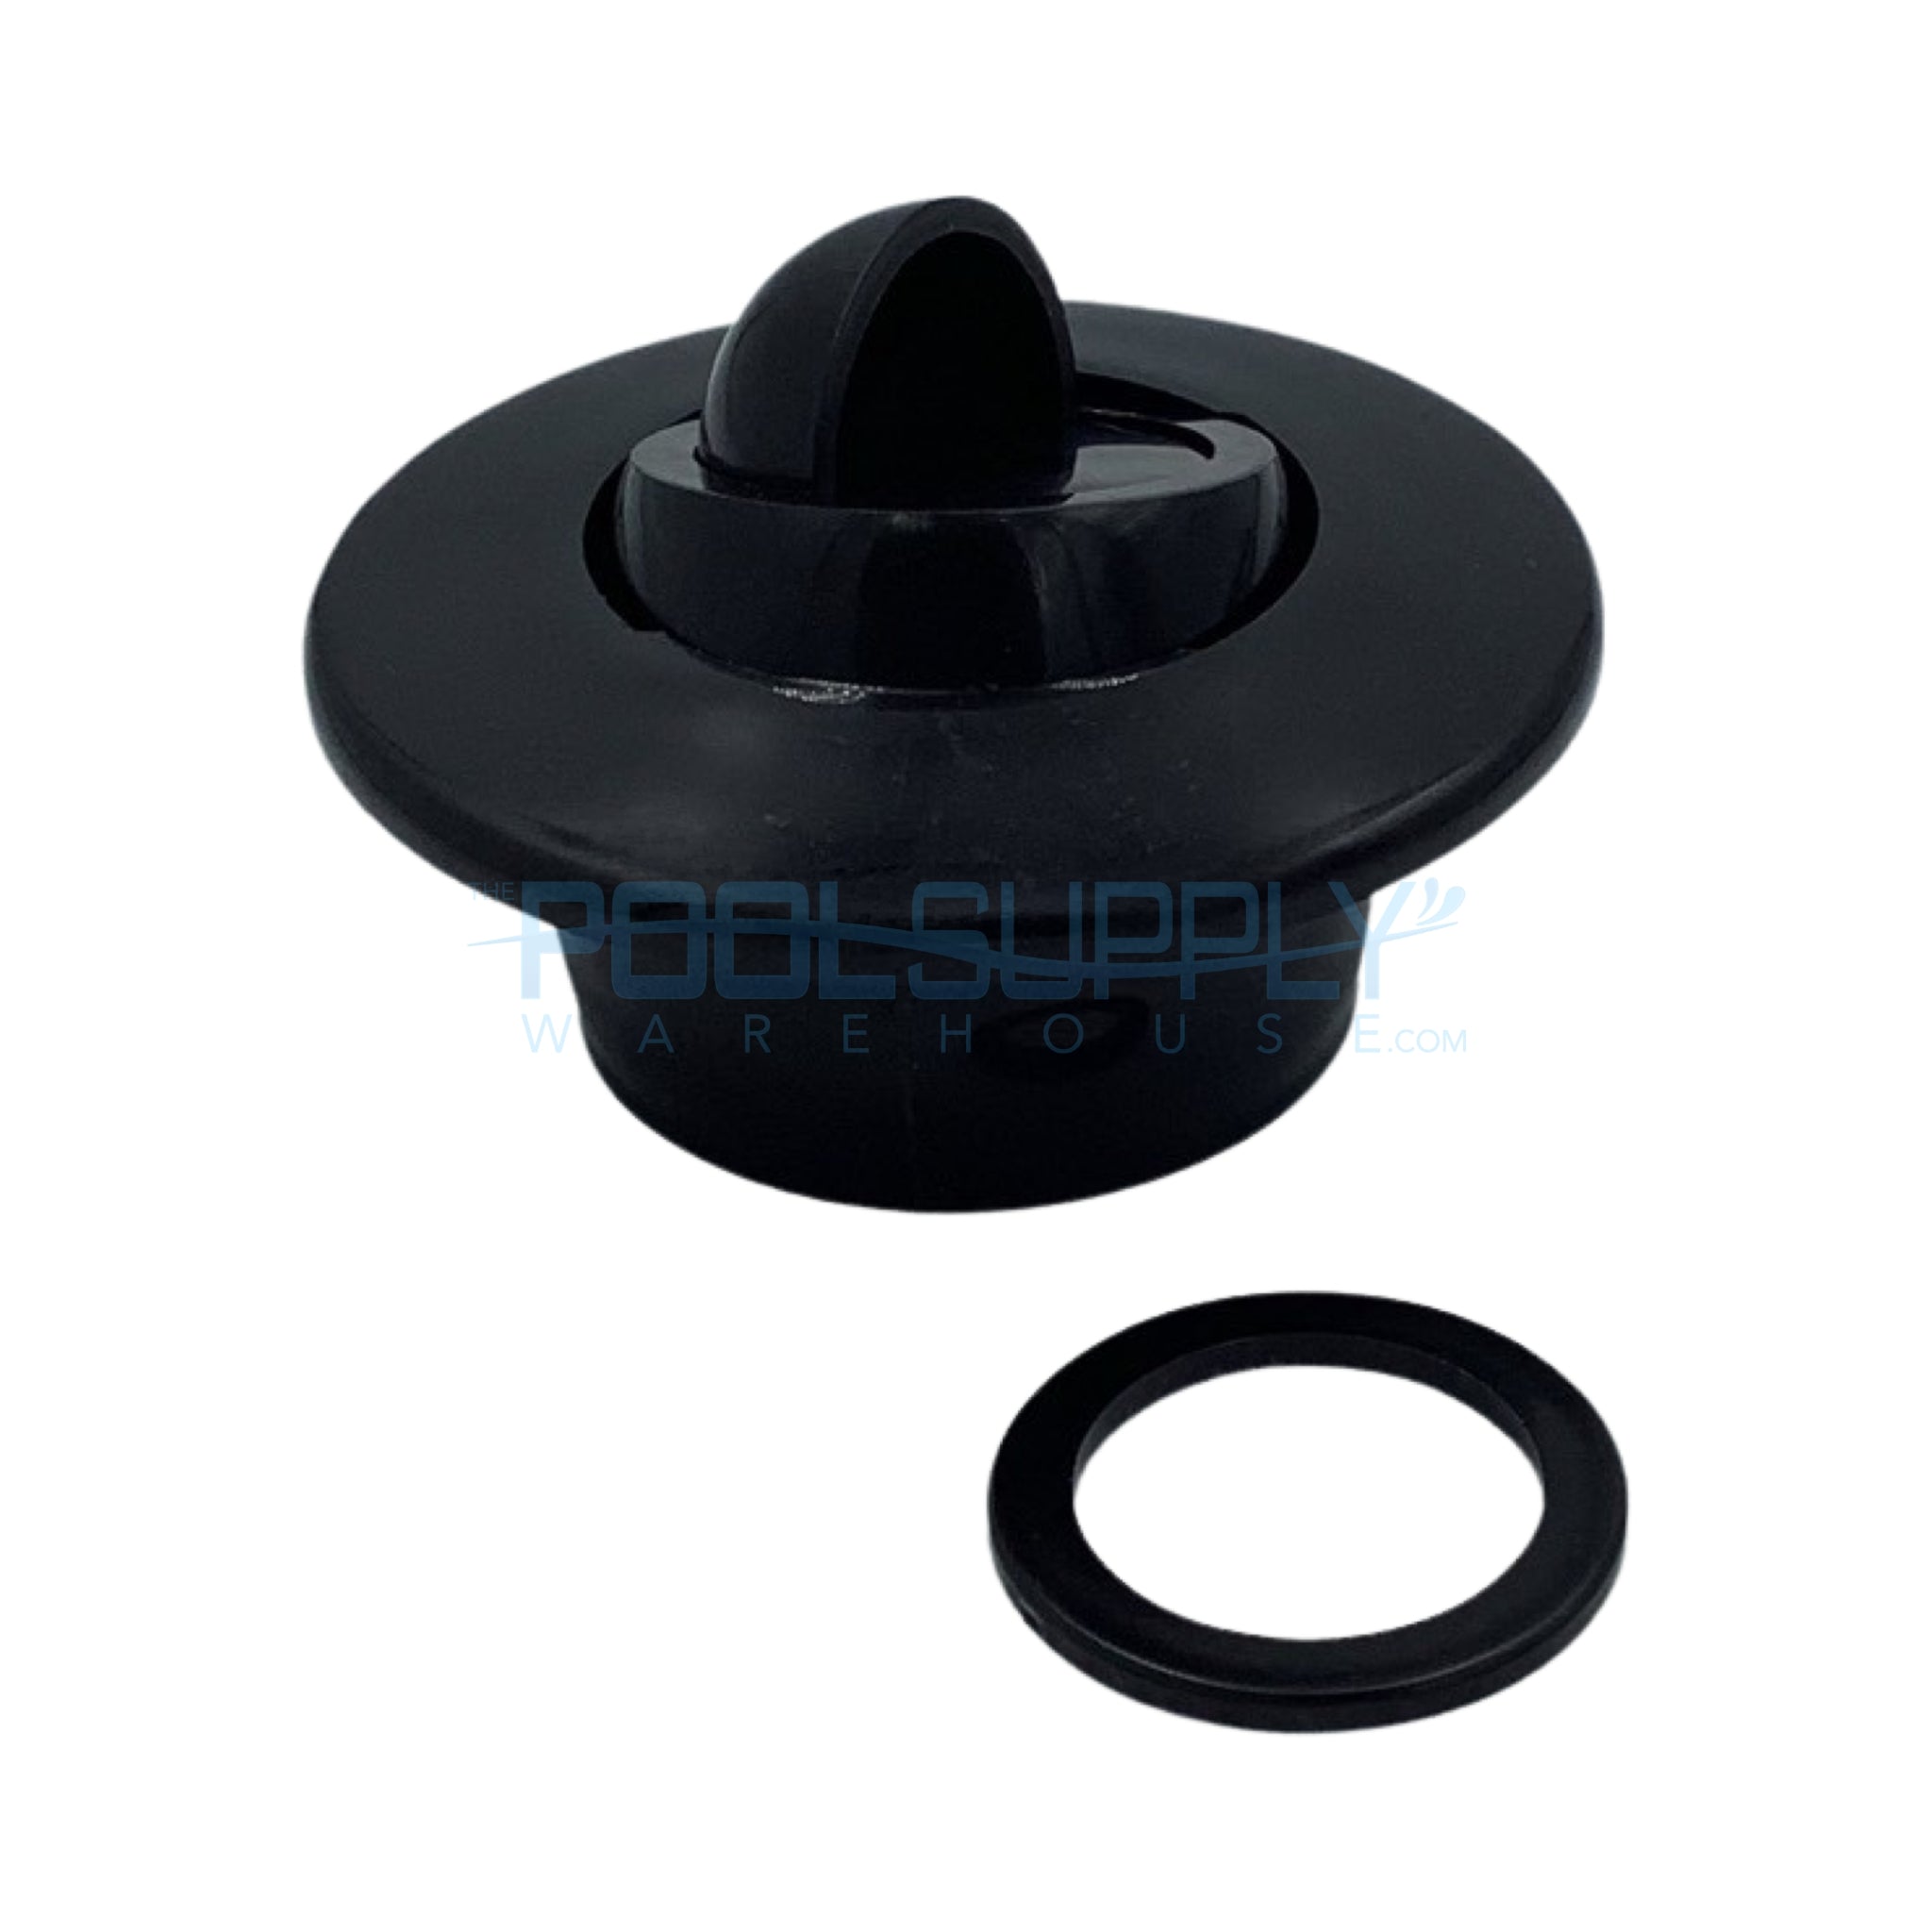 CMP 2" Self-Aligning Aussie Insider, Black - 25559-204-000 - The Pool Supply Warehouse